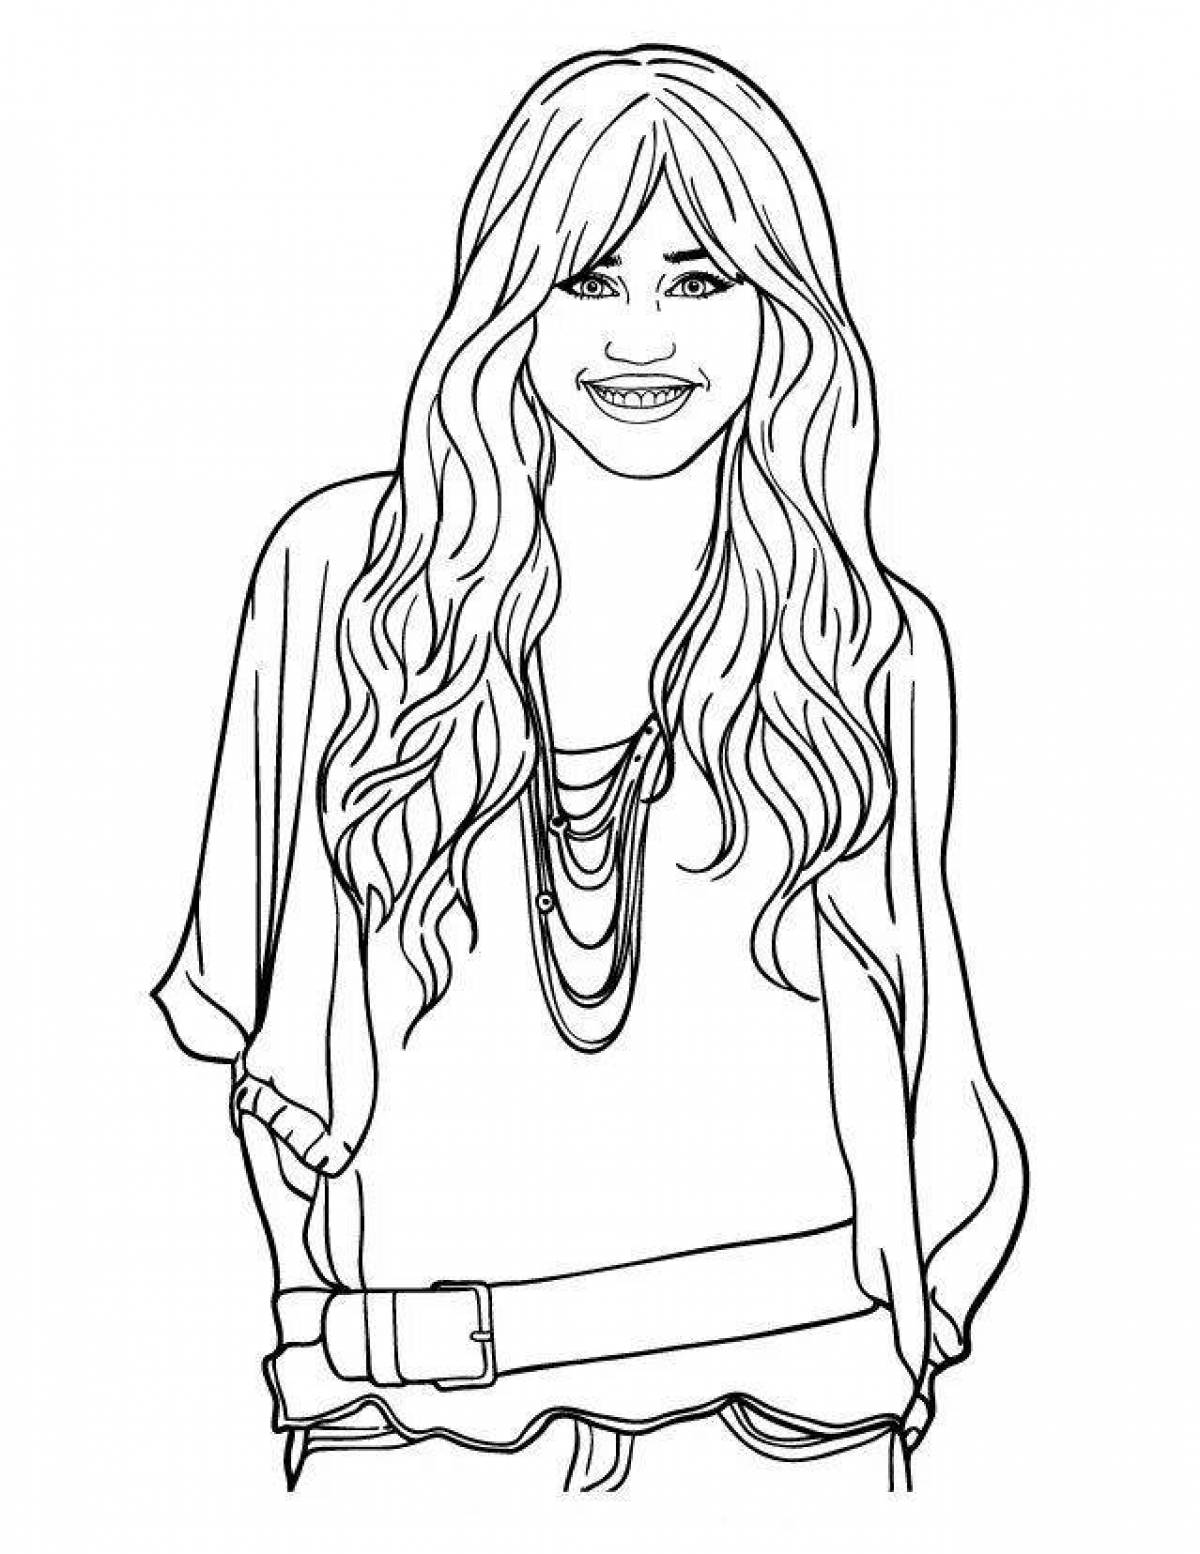 Adorable coloring book cool for girls 14 years old